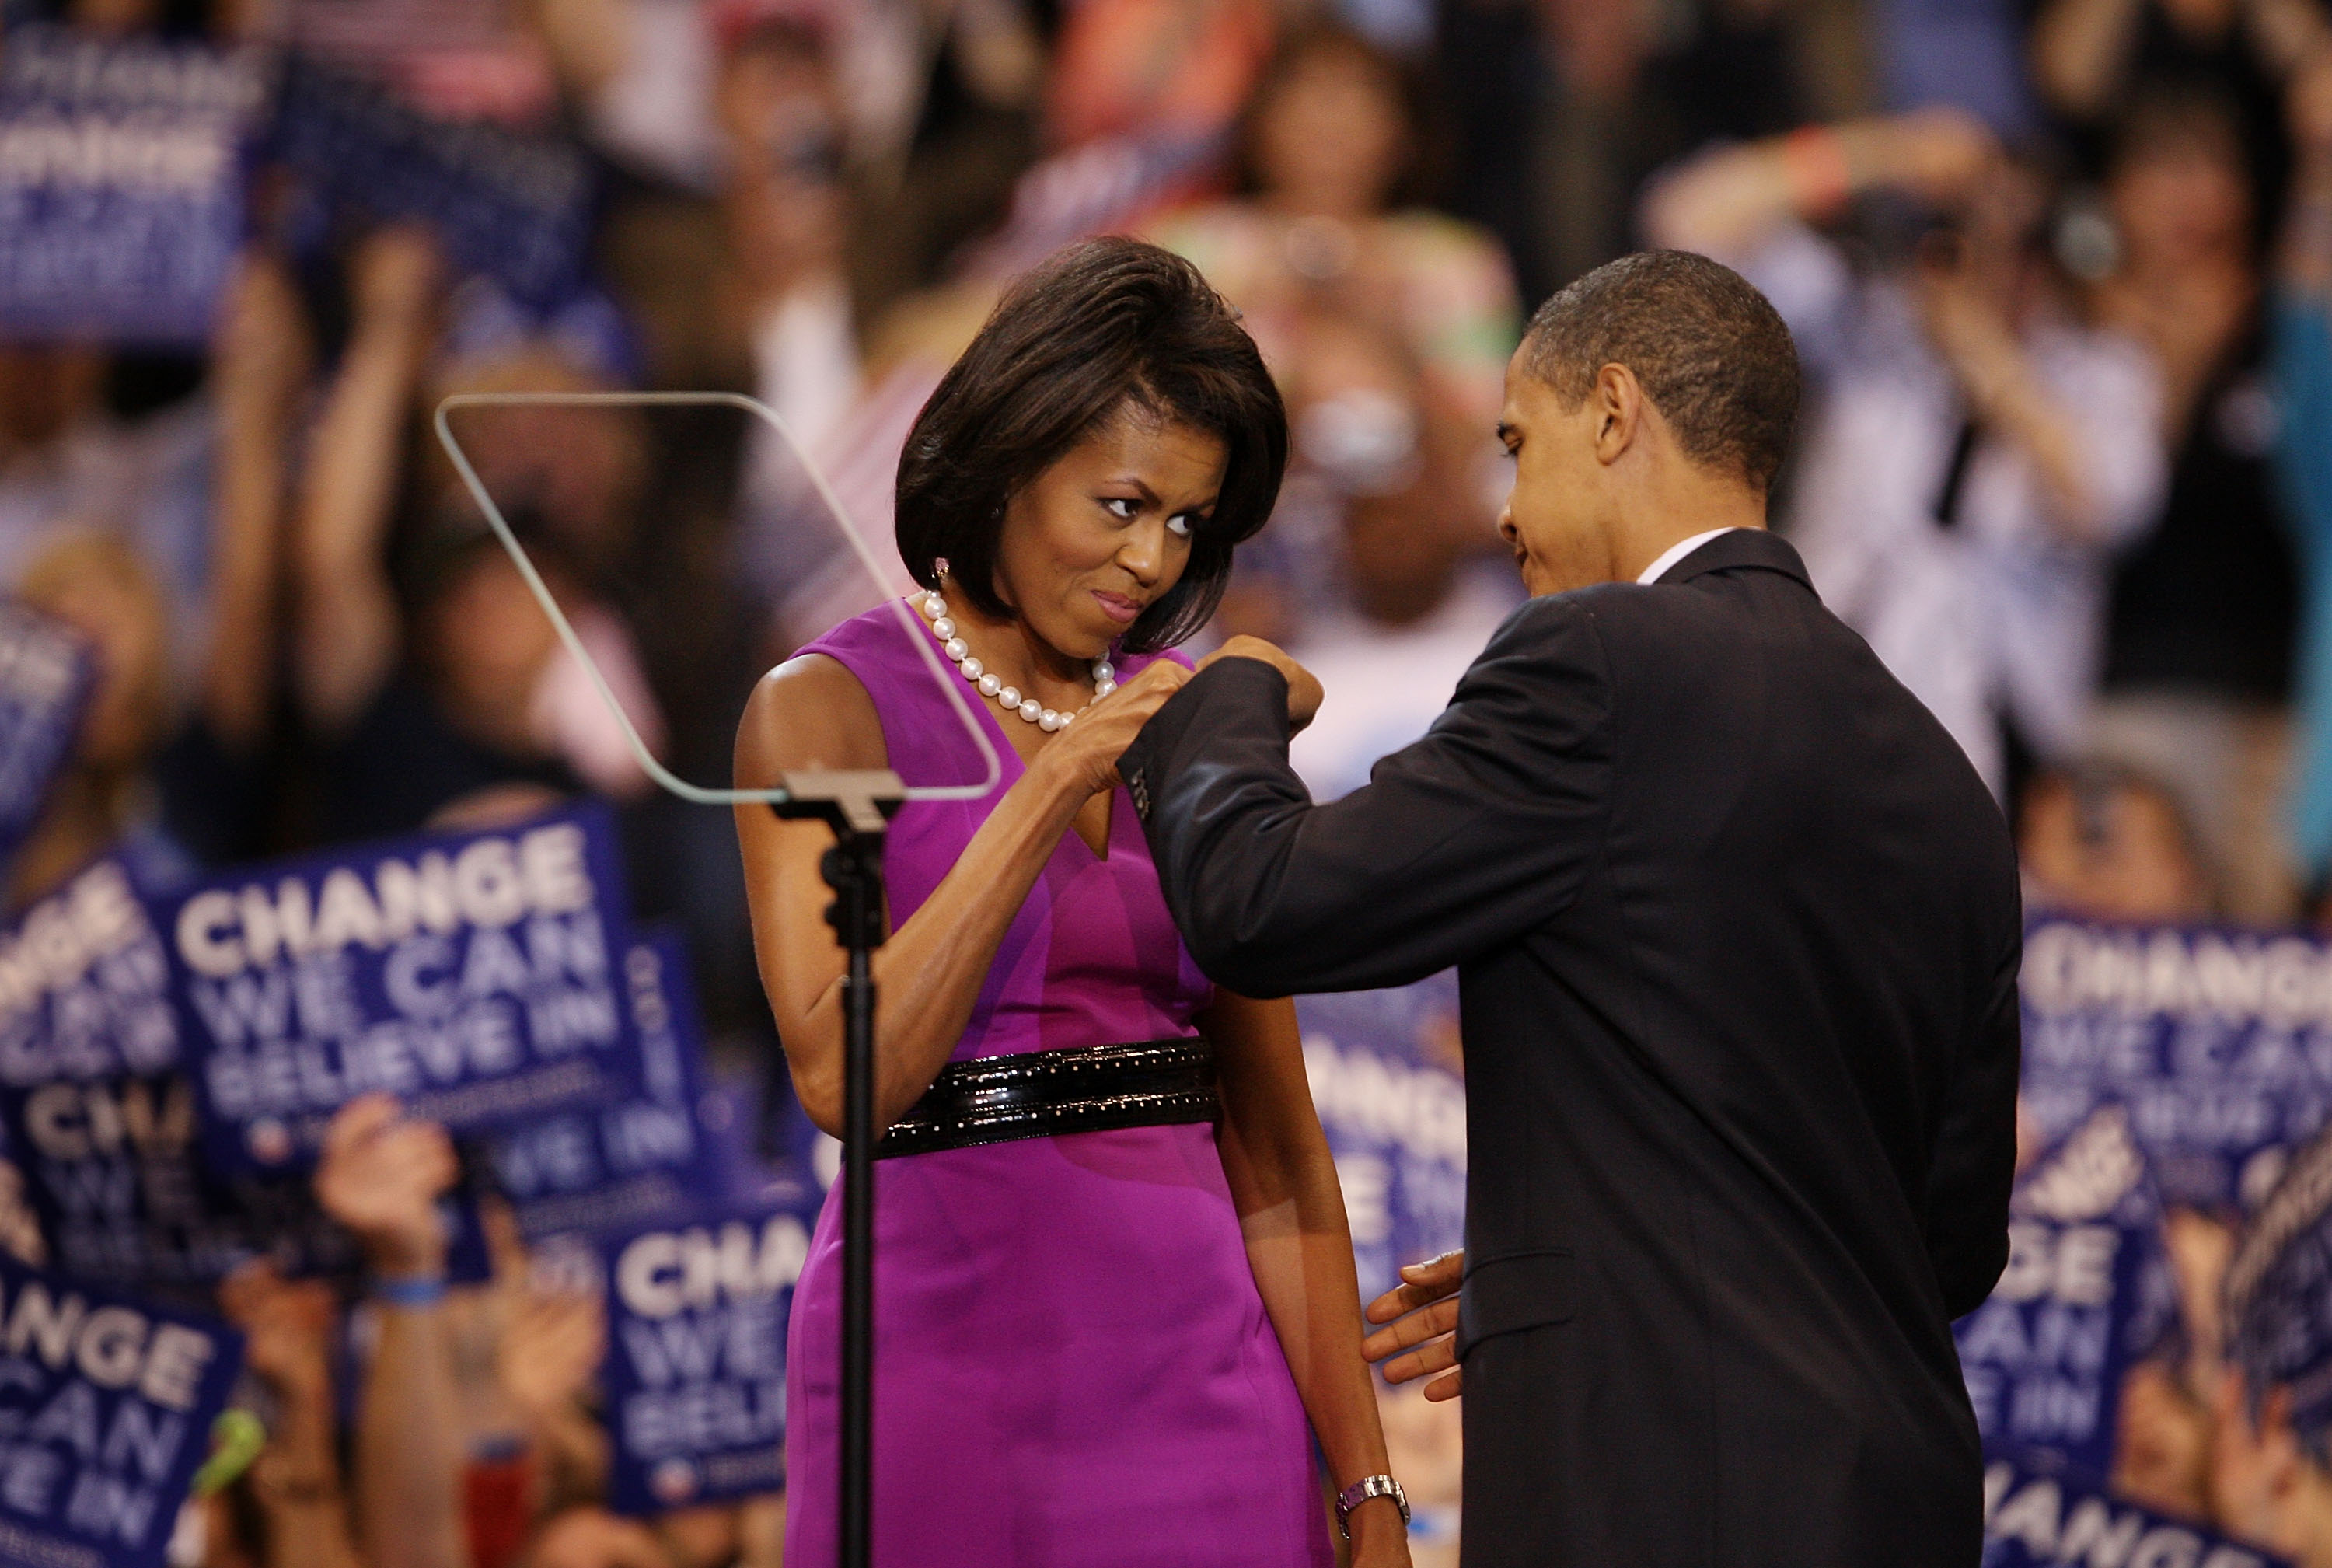 From right: U.S. President Barack Obama and First Lady Michelle Obama bump fists at an election night rally at the Xcel Energy Center on June 3, 2008 in St. Paul, Minn. during his first presidential campaign. (Scott Olson--Getty Images)